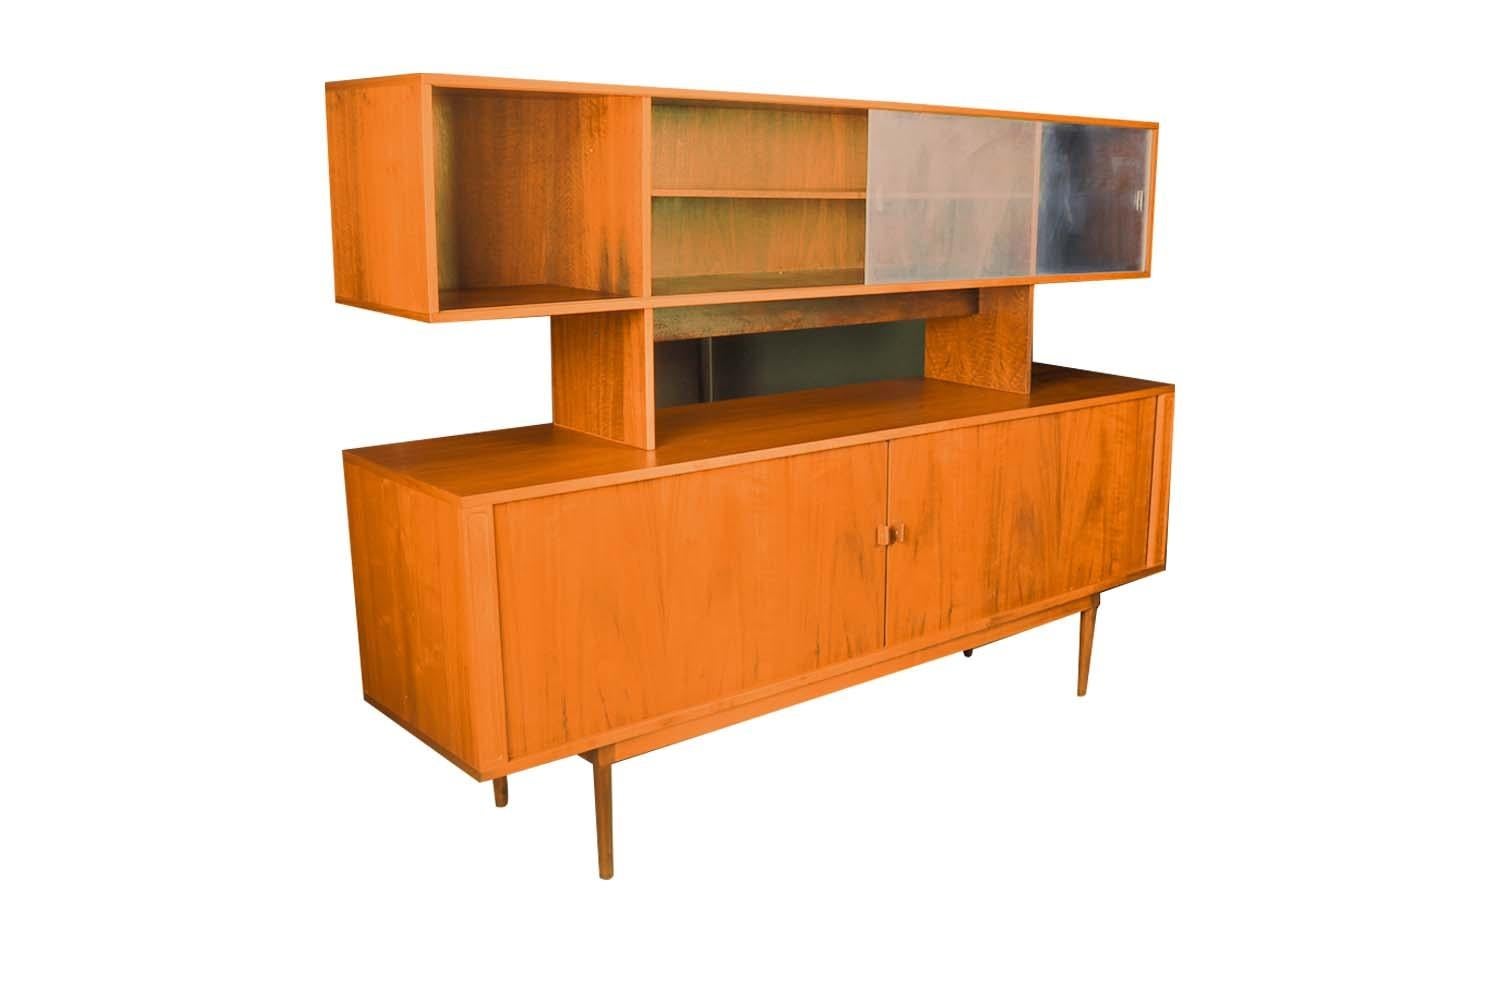 Remarkable, teak, stunning tambour door, two-piece hutch credenza made by Lovig in Denmark and designed by the renowned Jens Quistgaard (April 23, 1919 – January 4, 2008) most famous for his iconic designs for Dansk Designs (Kobenstyle cookware,